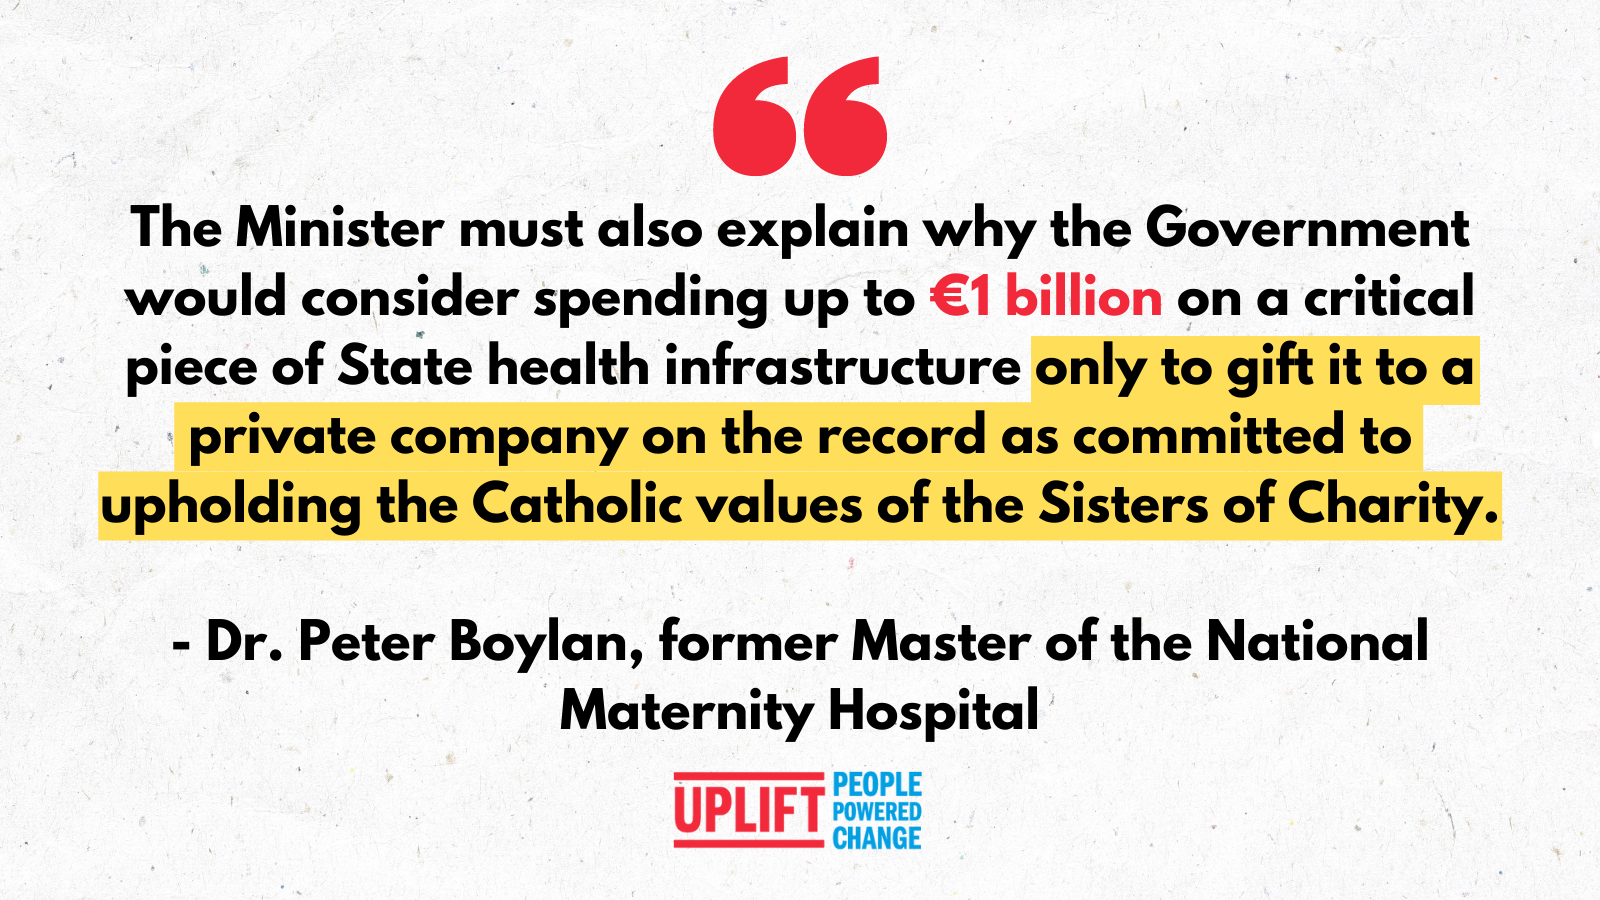 Text says, 'The minister must also explain why the Goverment would consider spending up to 1 billion euro on a critical piece of State health infrastructure only to gift it to a private company on the record as committed to upholding the Catholic values of the sisters of Charity - Dr. Peter Boylan